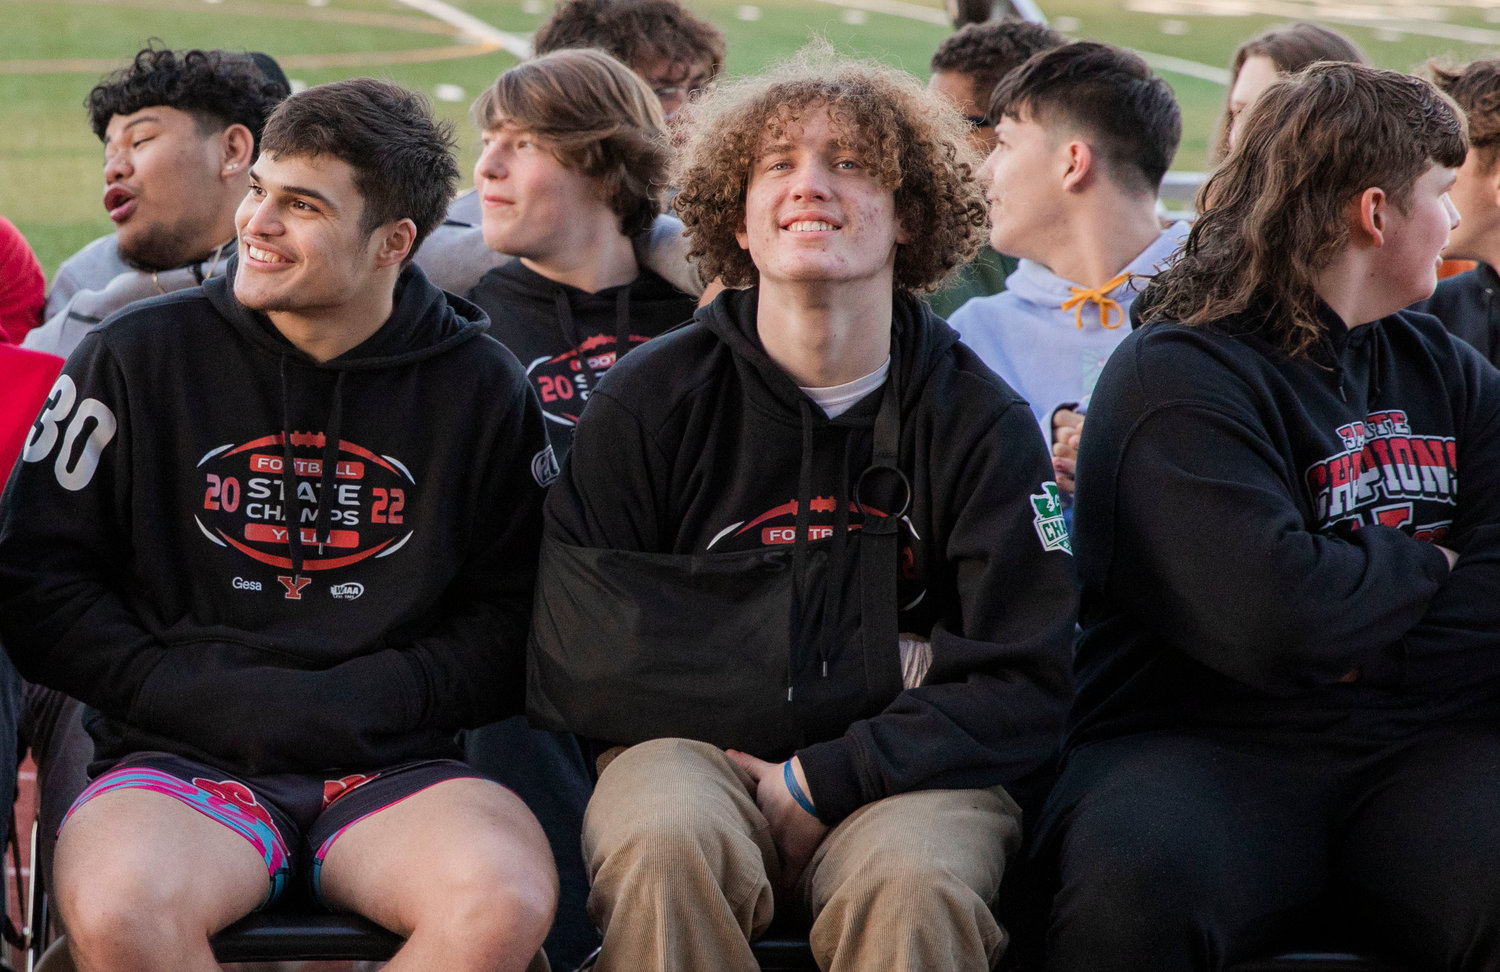 Athletes look on as Tornado fans cheer following a celebration parade in Yelm Monday evening.